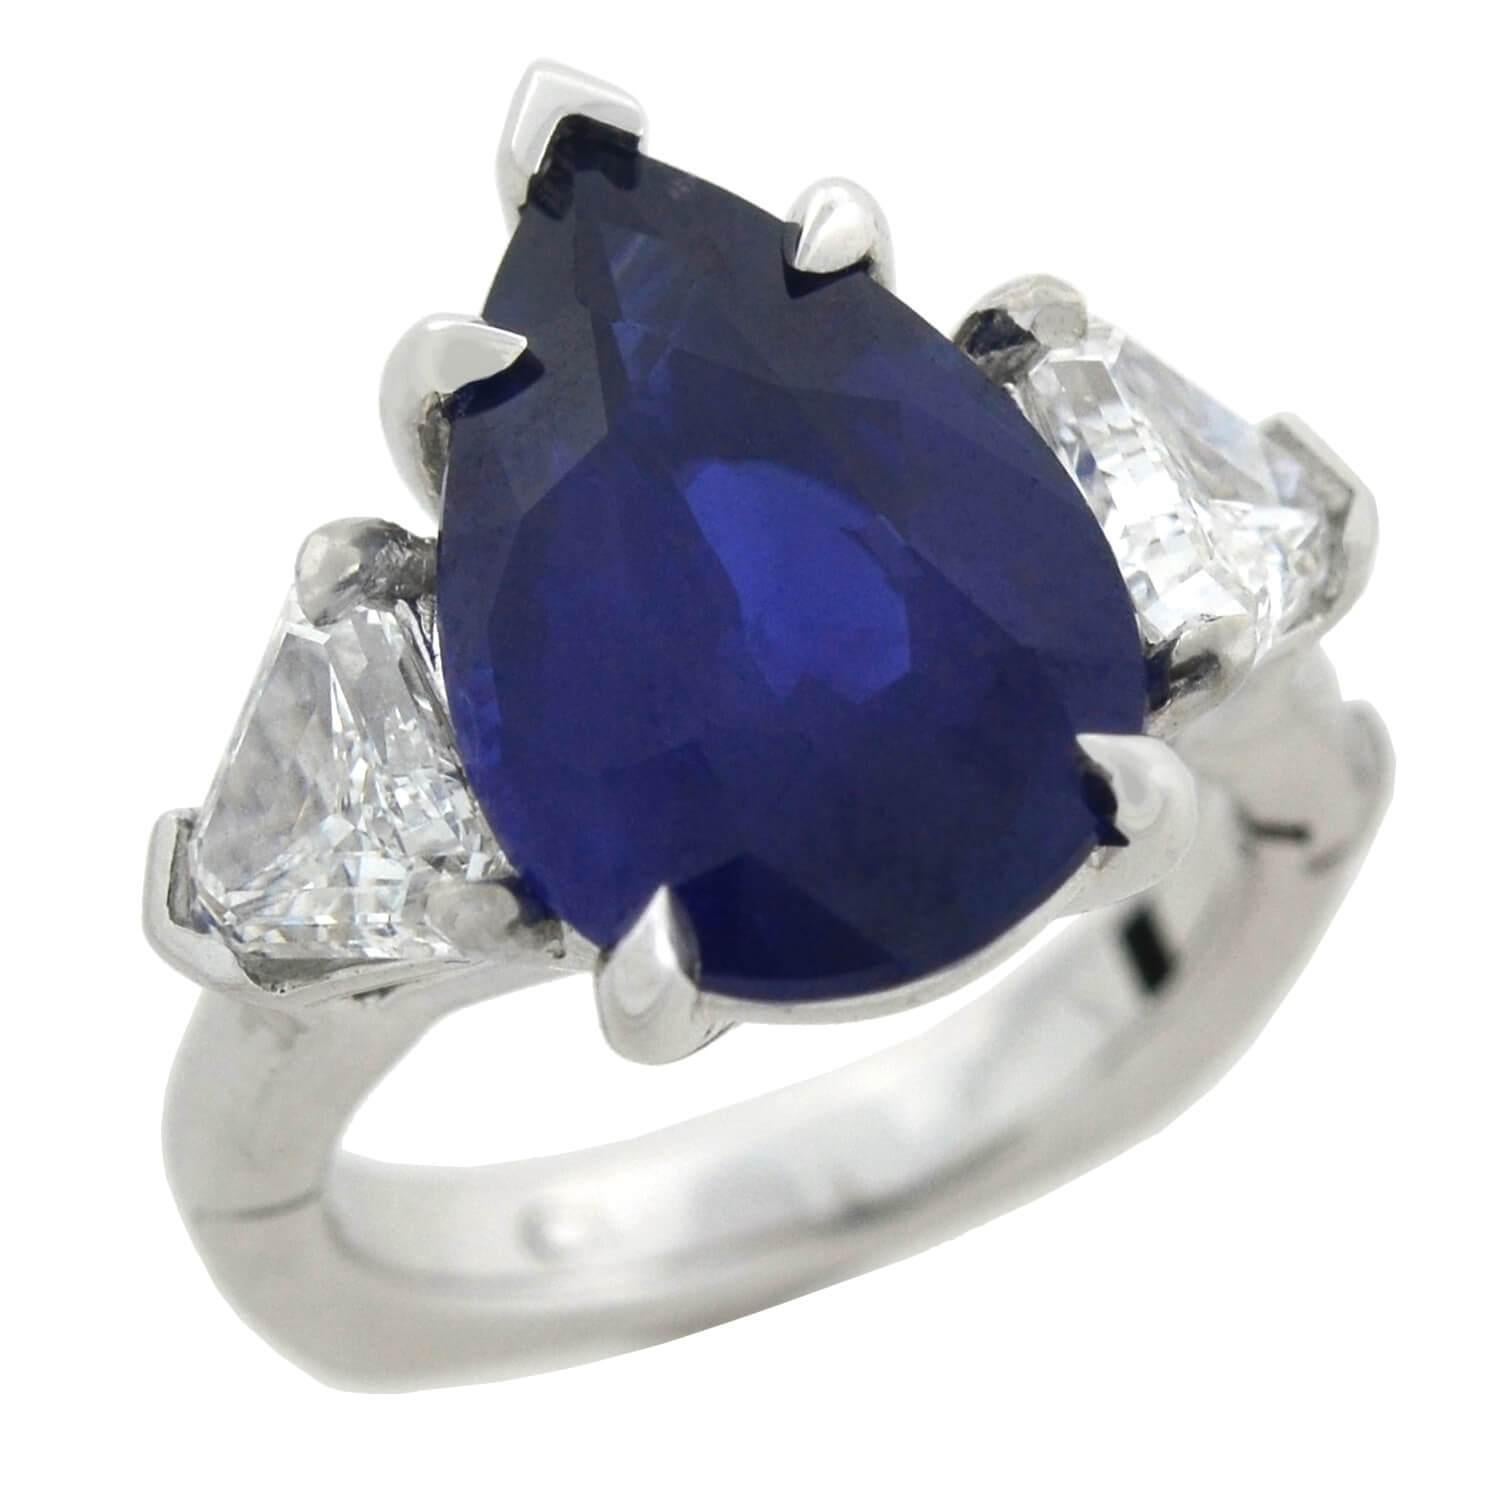 An incredible and unique Estate sapphire and diamond ring! This stunning 14kt white gold piece holds an impressive 6.05ct Pear shaped natural heated sapphire at the center of a gorgeous diamond setting. The vivid stone is claw set, exhibiting